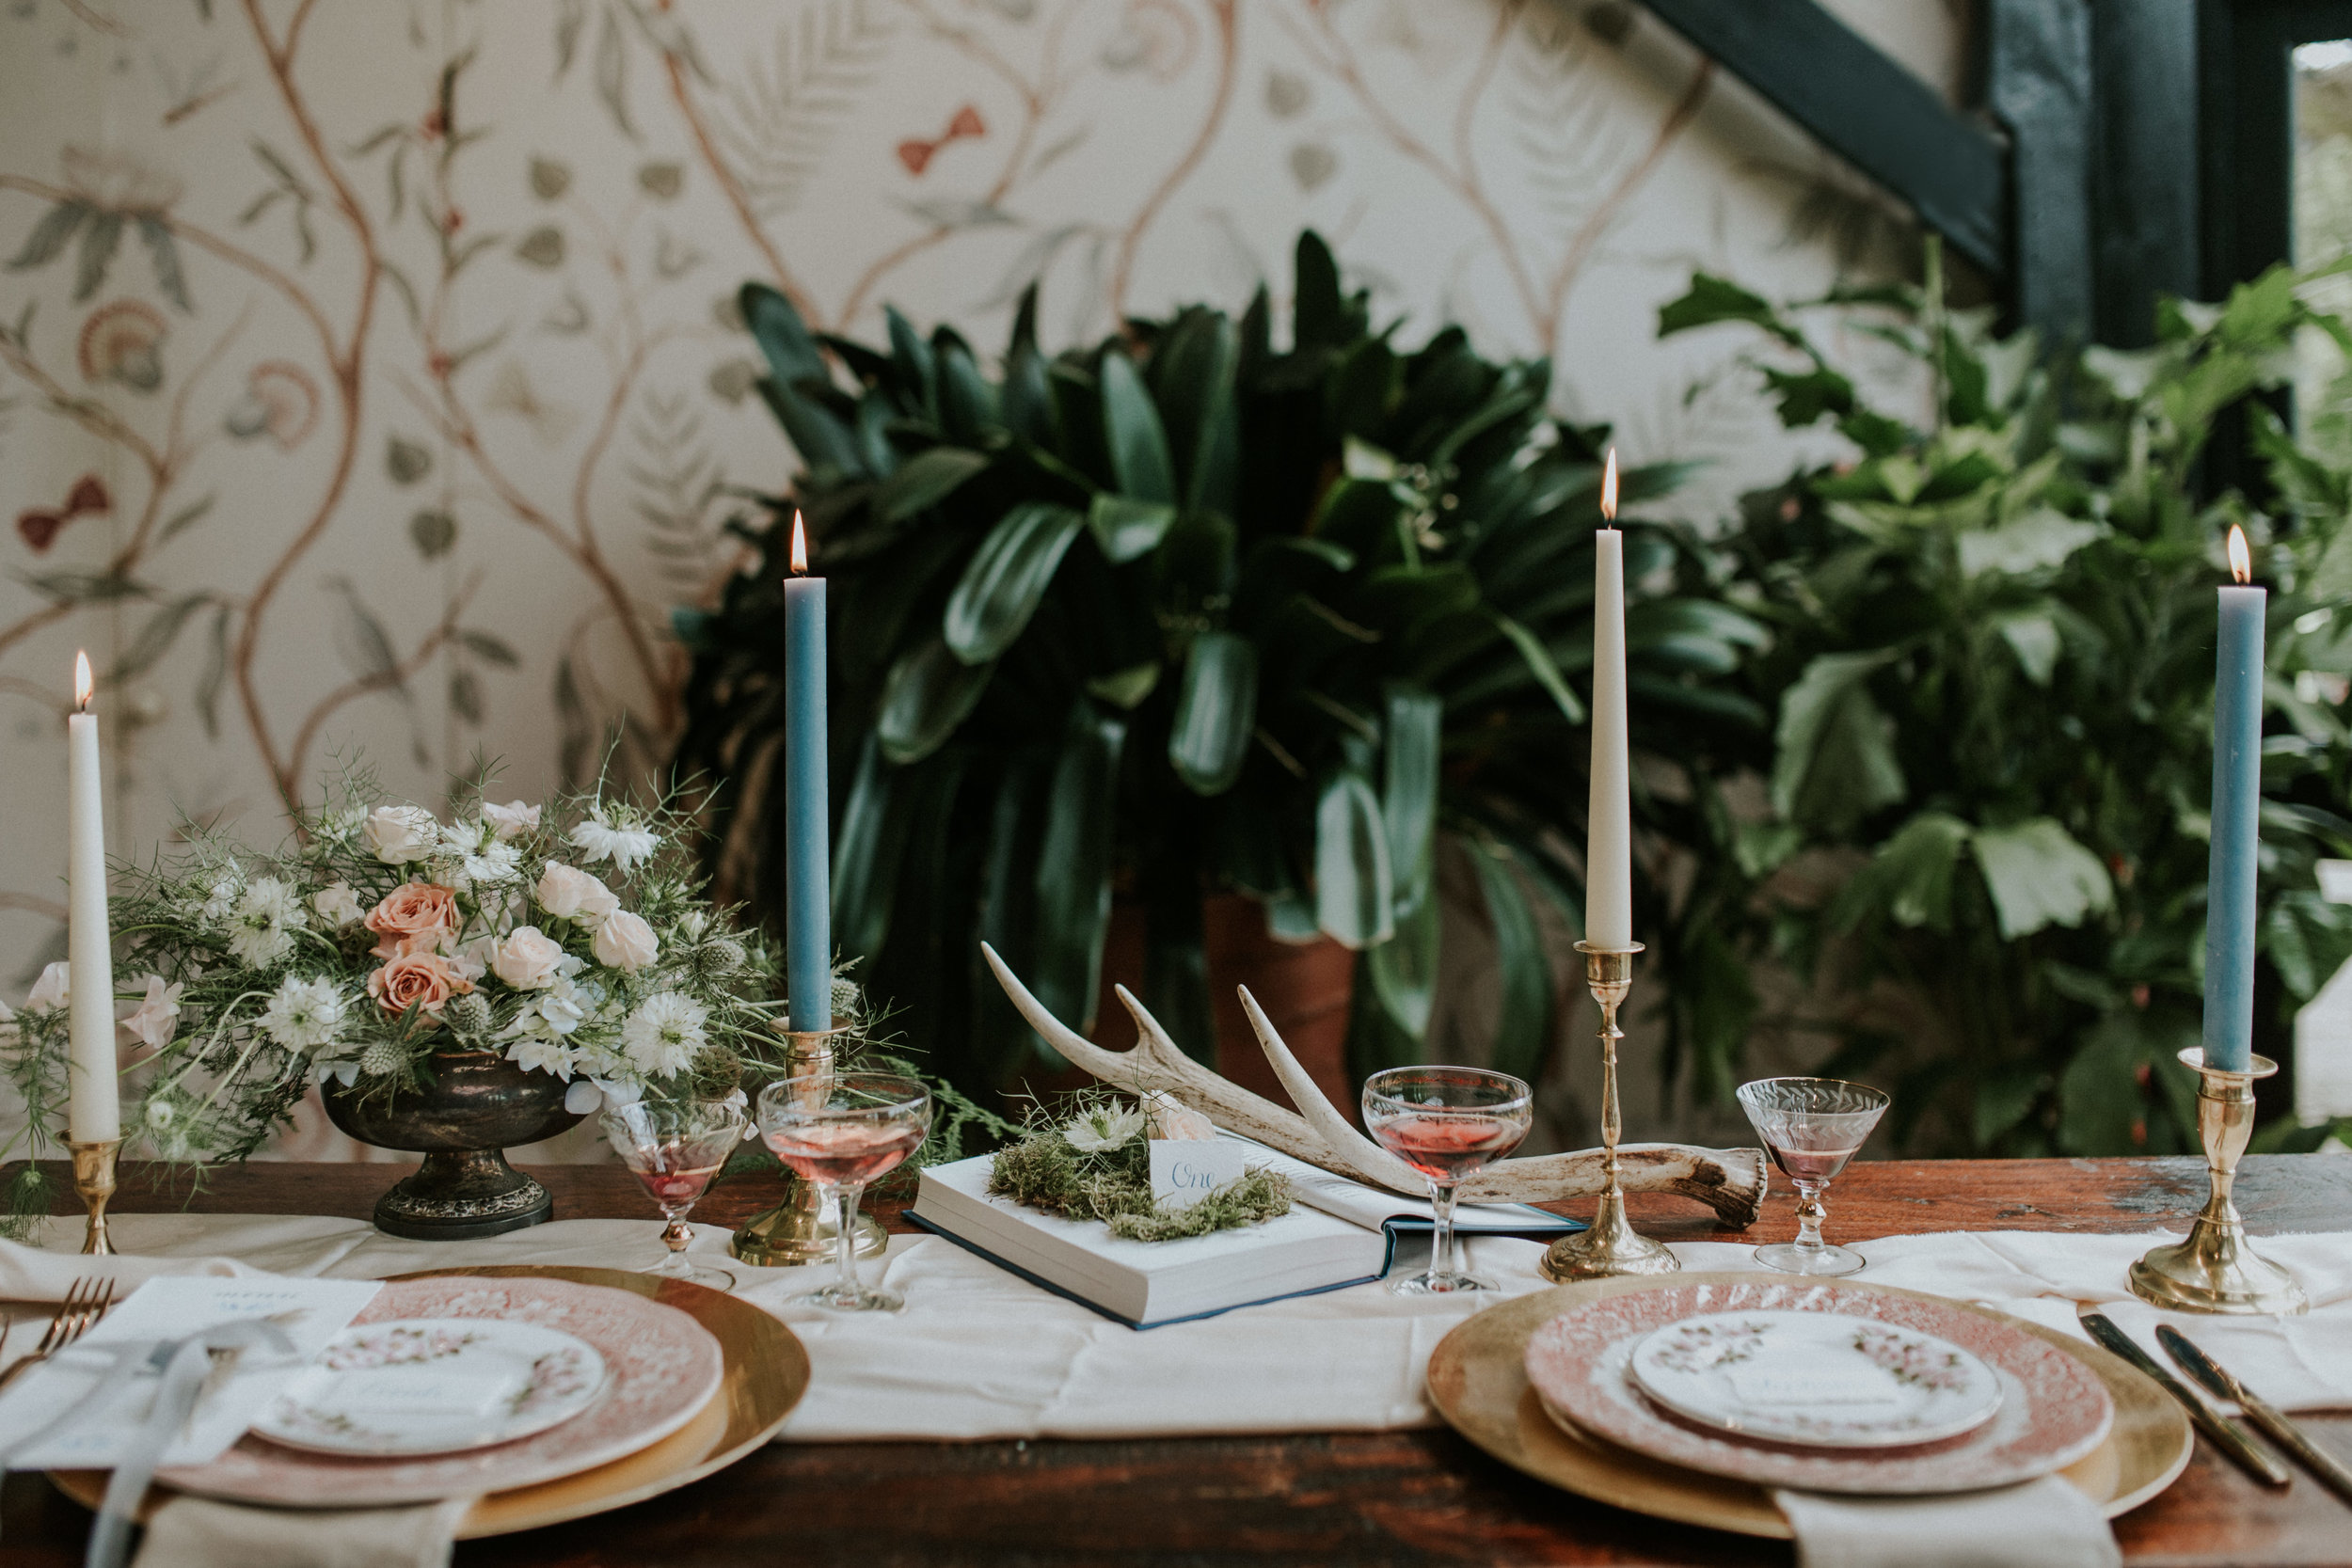 Photo Credit:  Lola Rose Photography  Styling:  The White Emporium   Flowers:  Twiggy Thistle  Stationery:  Sugar and spice designs